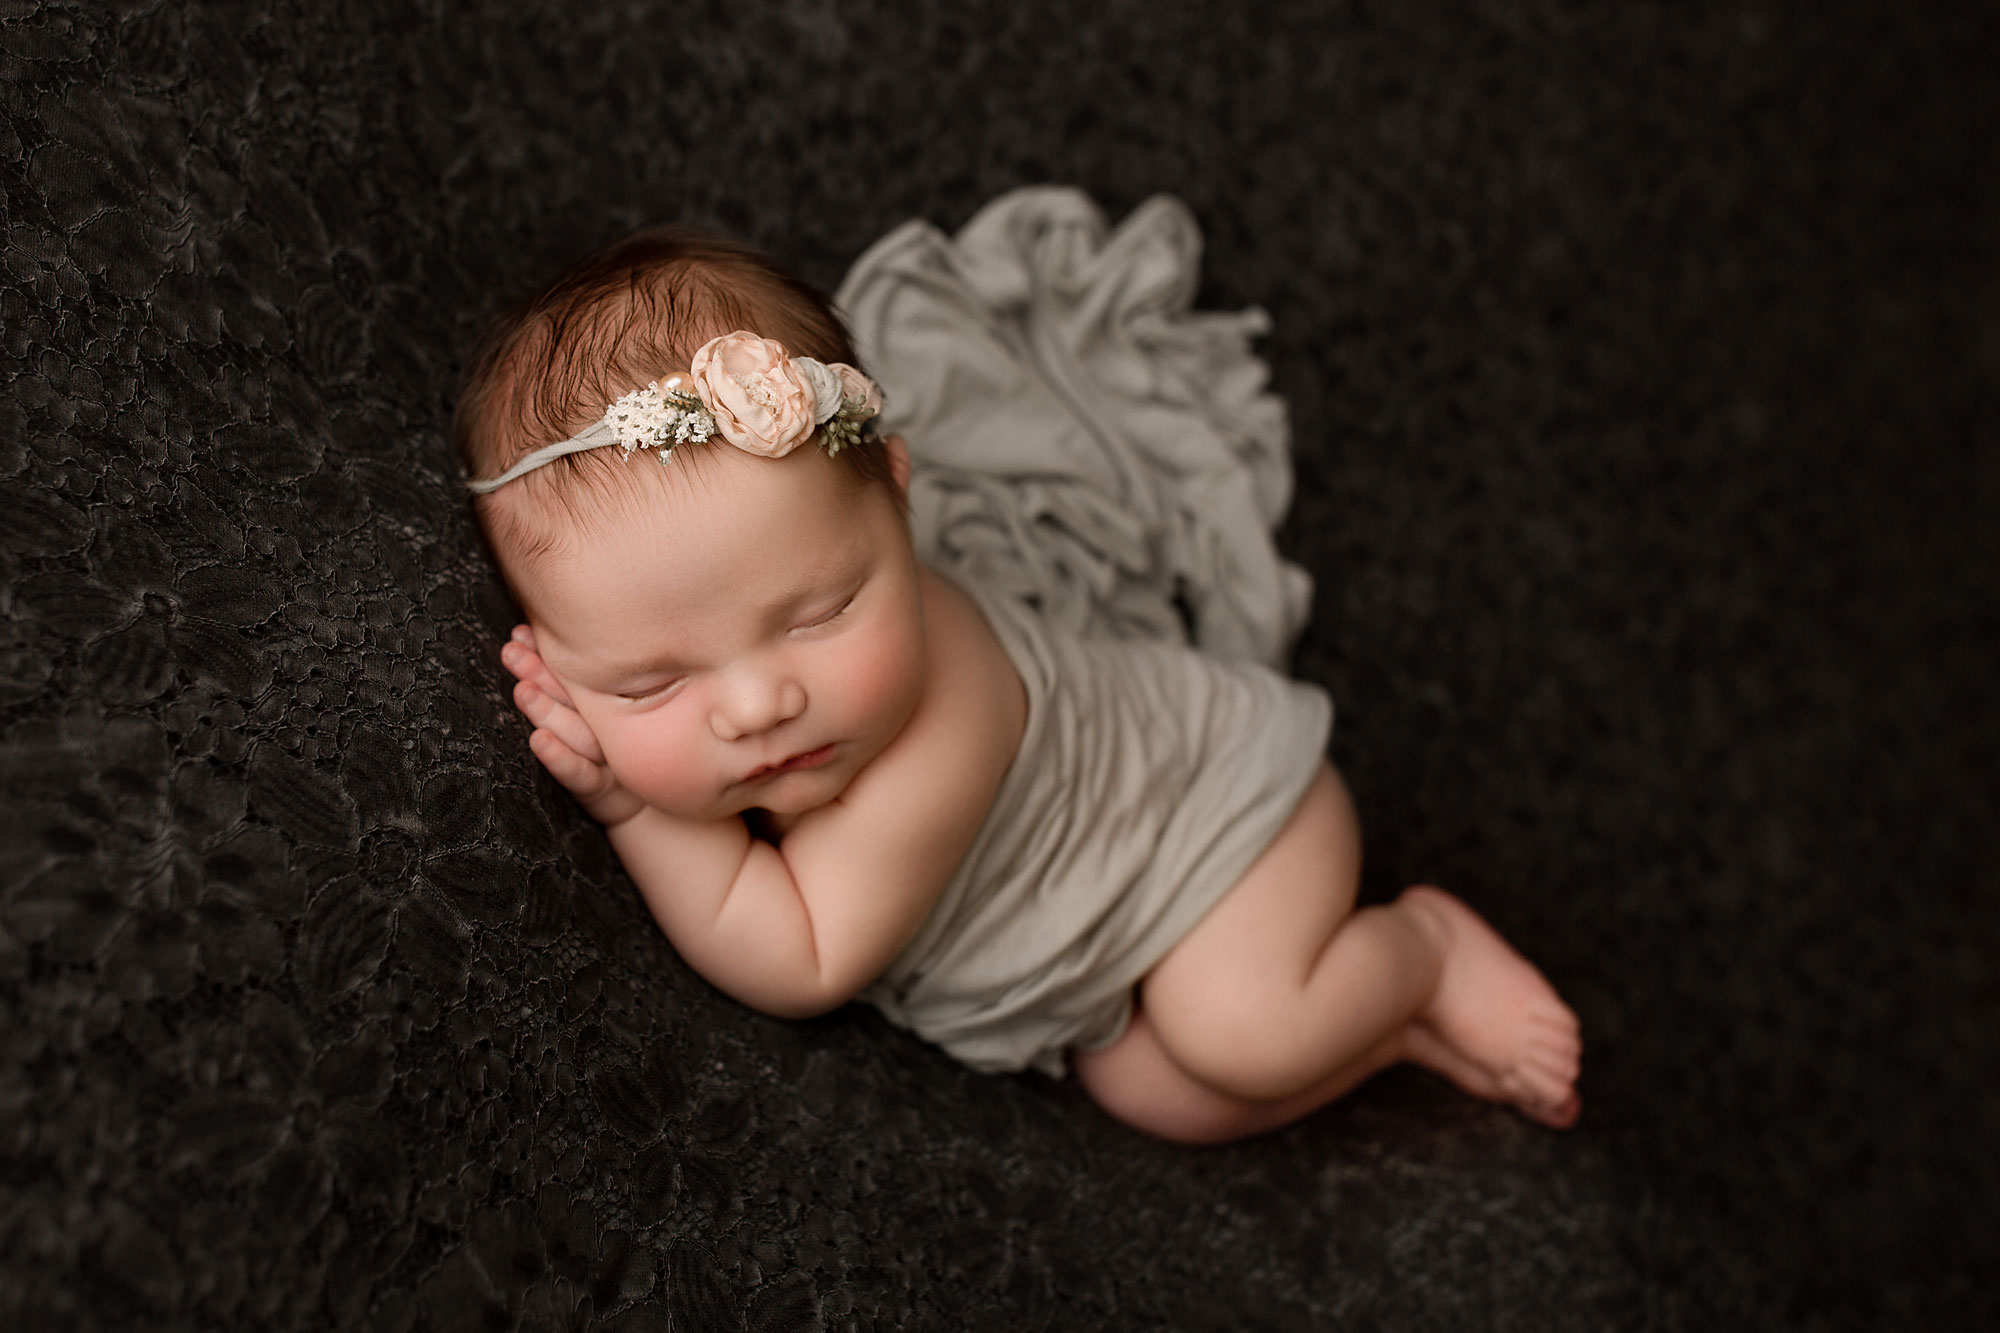 beautiful baby pictures near me, sleeping baby girl in gray wrap and blush pink headband against deep gray backdrop